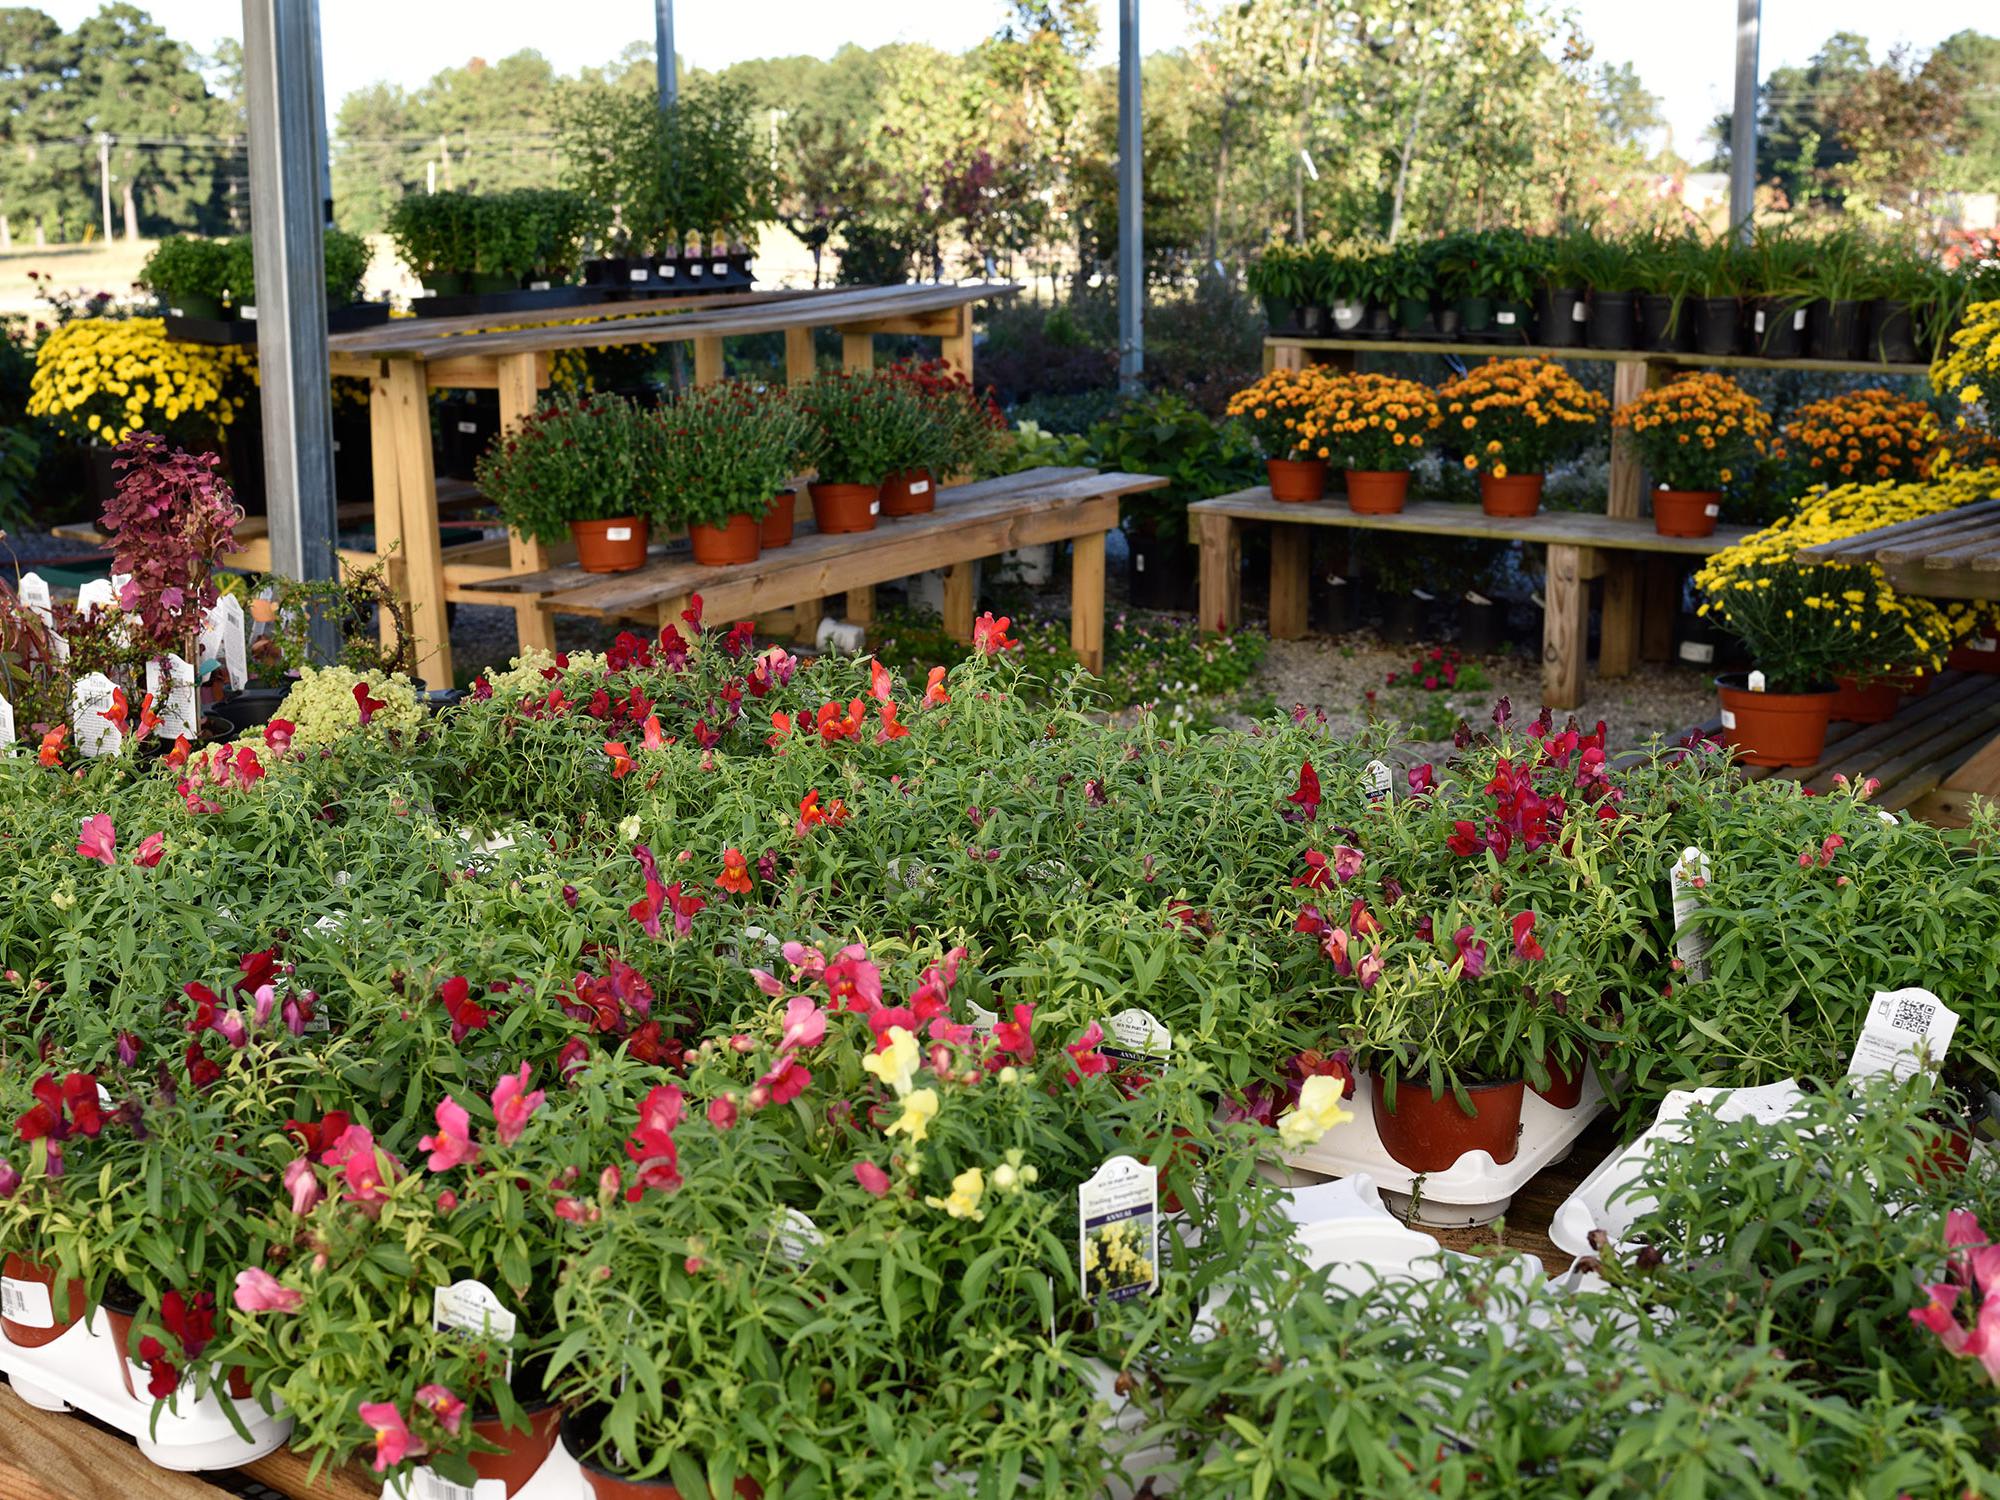 Shrubs, trees, bedding plants and seasonal mums are displayed at Evergreen Garden Center in Louisville on Sept. 24, 2014. Gardeners bought more landscaping products in 2014 than in recent years. (Photo by MSU Ag Communications/Kevin Hudson)